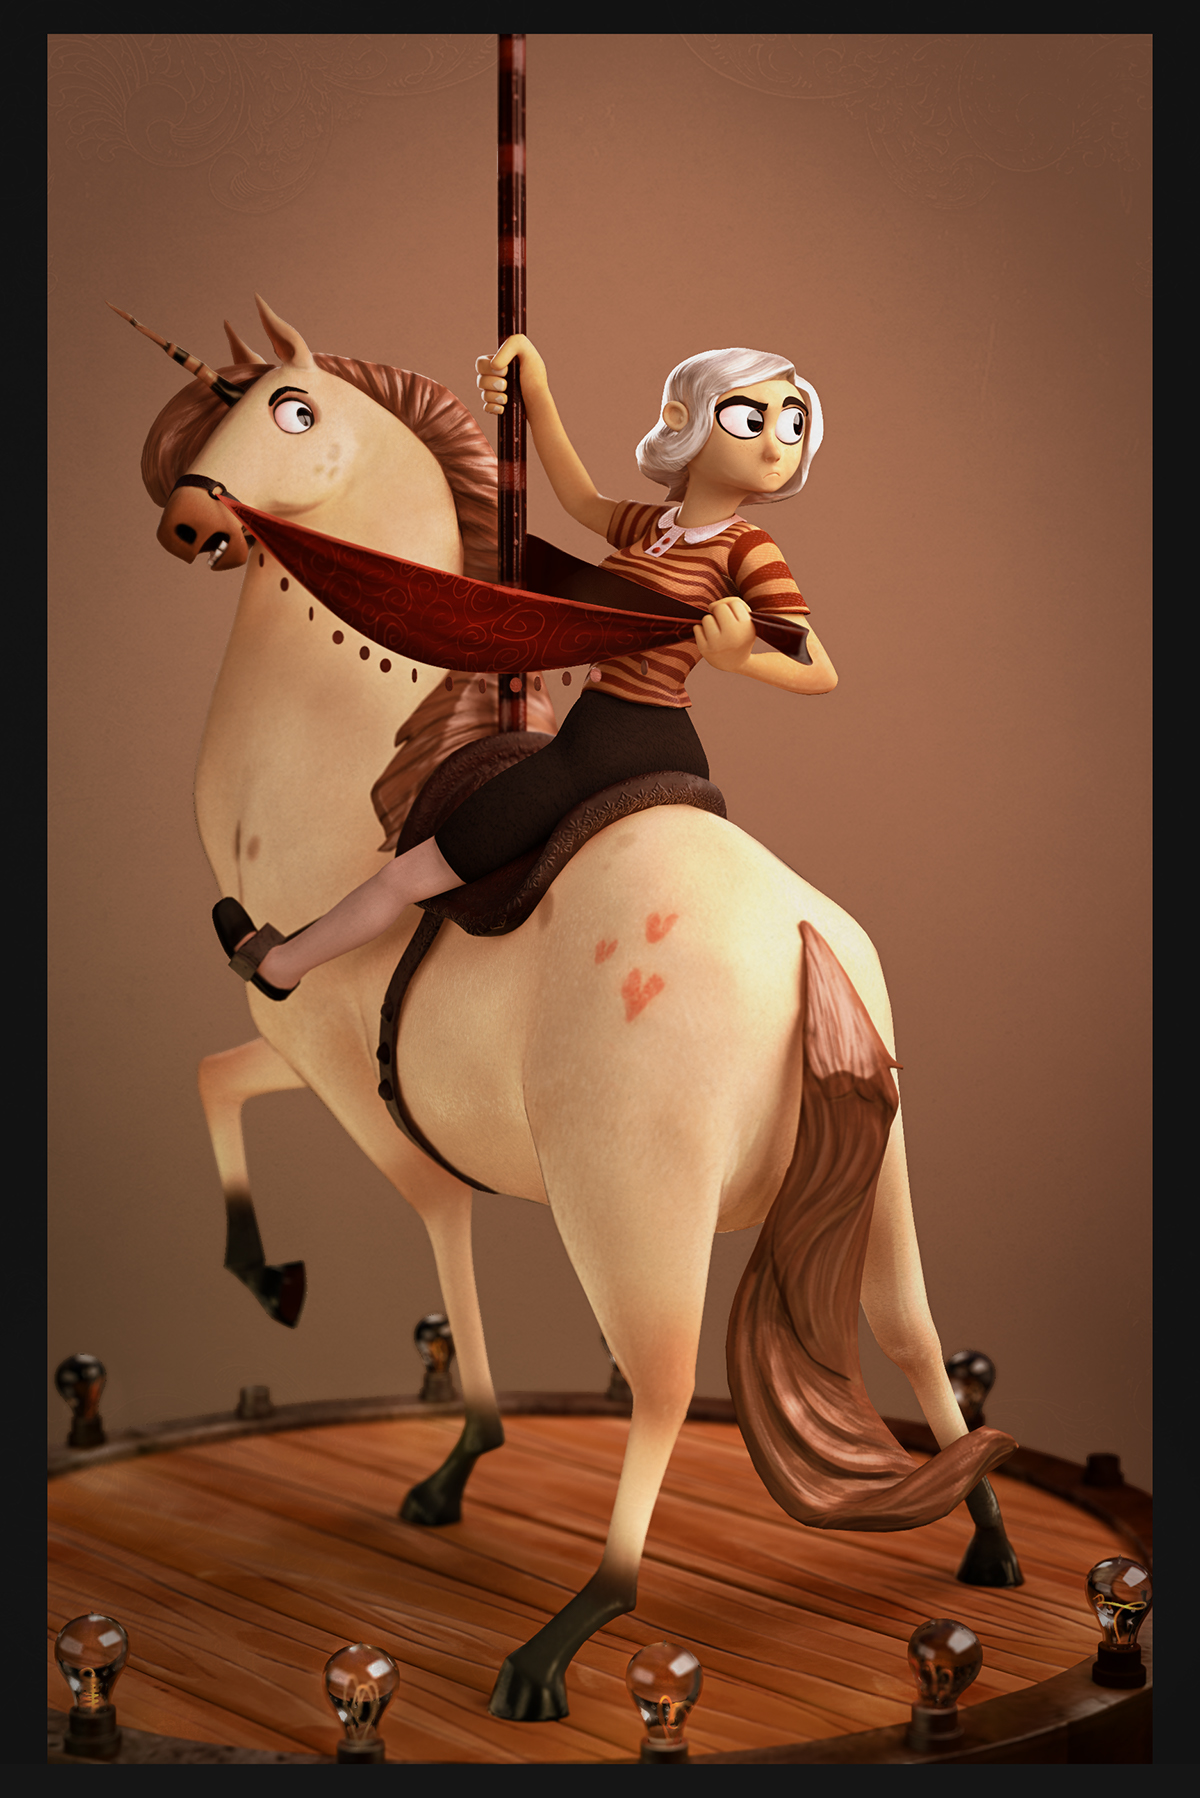 horse rider feature animation Character Cartoony stylized girl whimsey